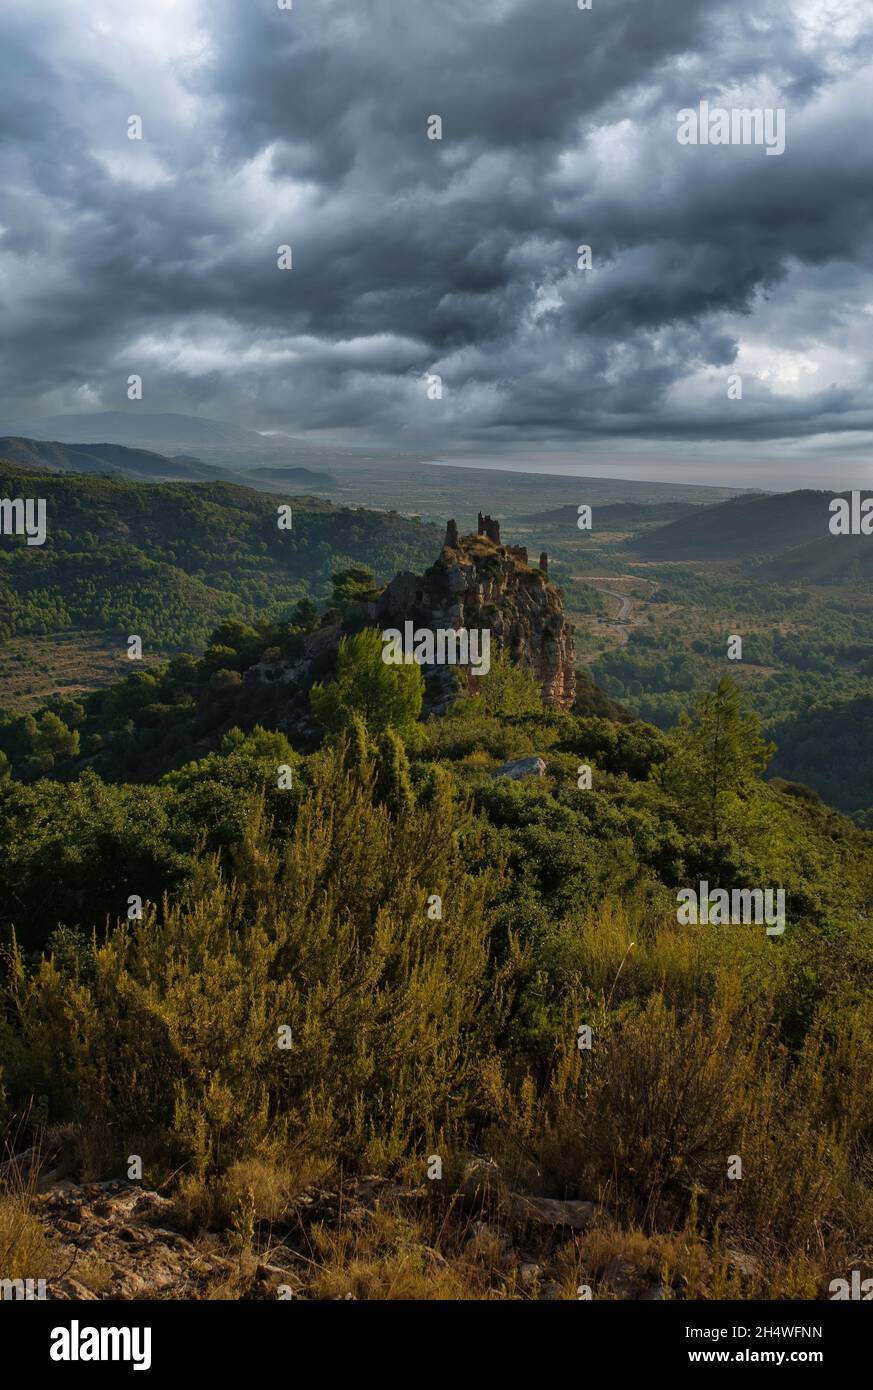 Miravet castle in cabanes under cloudy sky, Spain Stock Photo